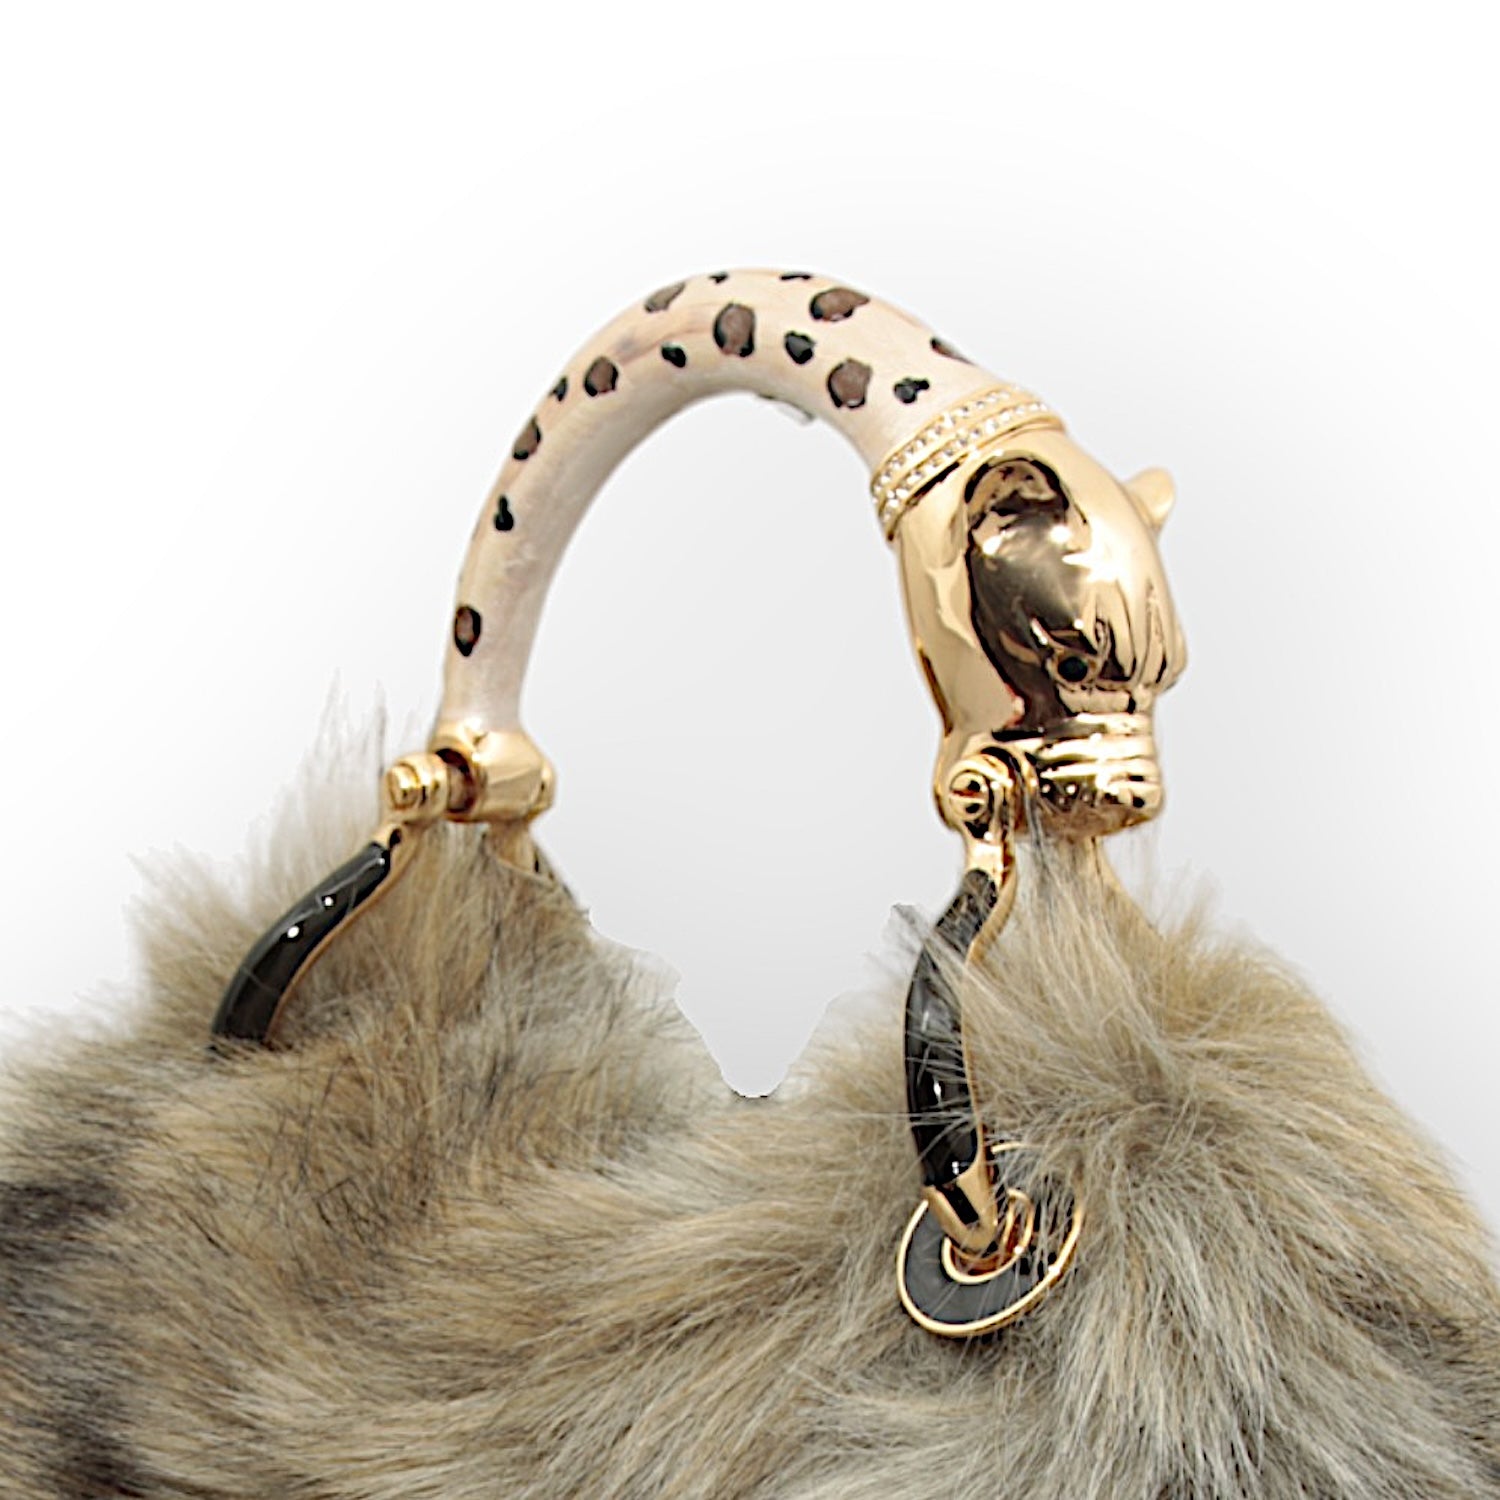 SMALL BAG IN FAUX FUR WHIT LEOPARD HANDLE